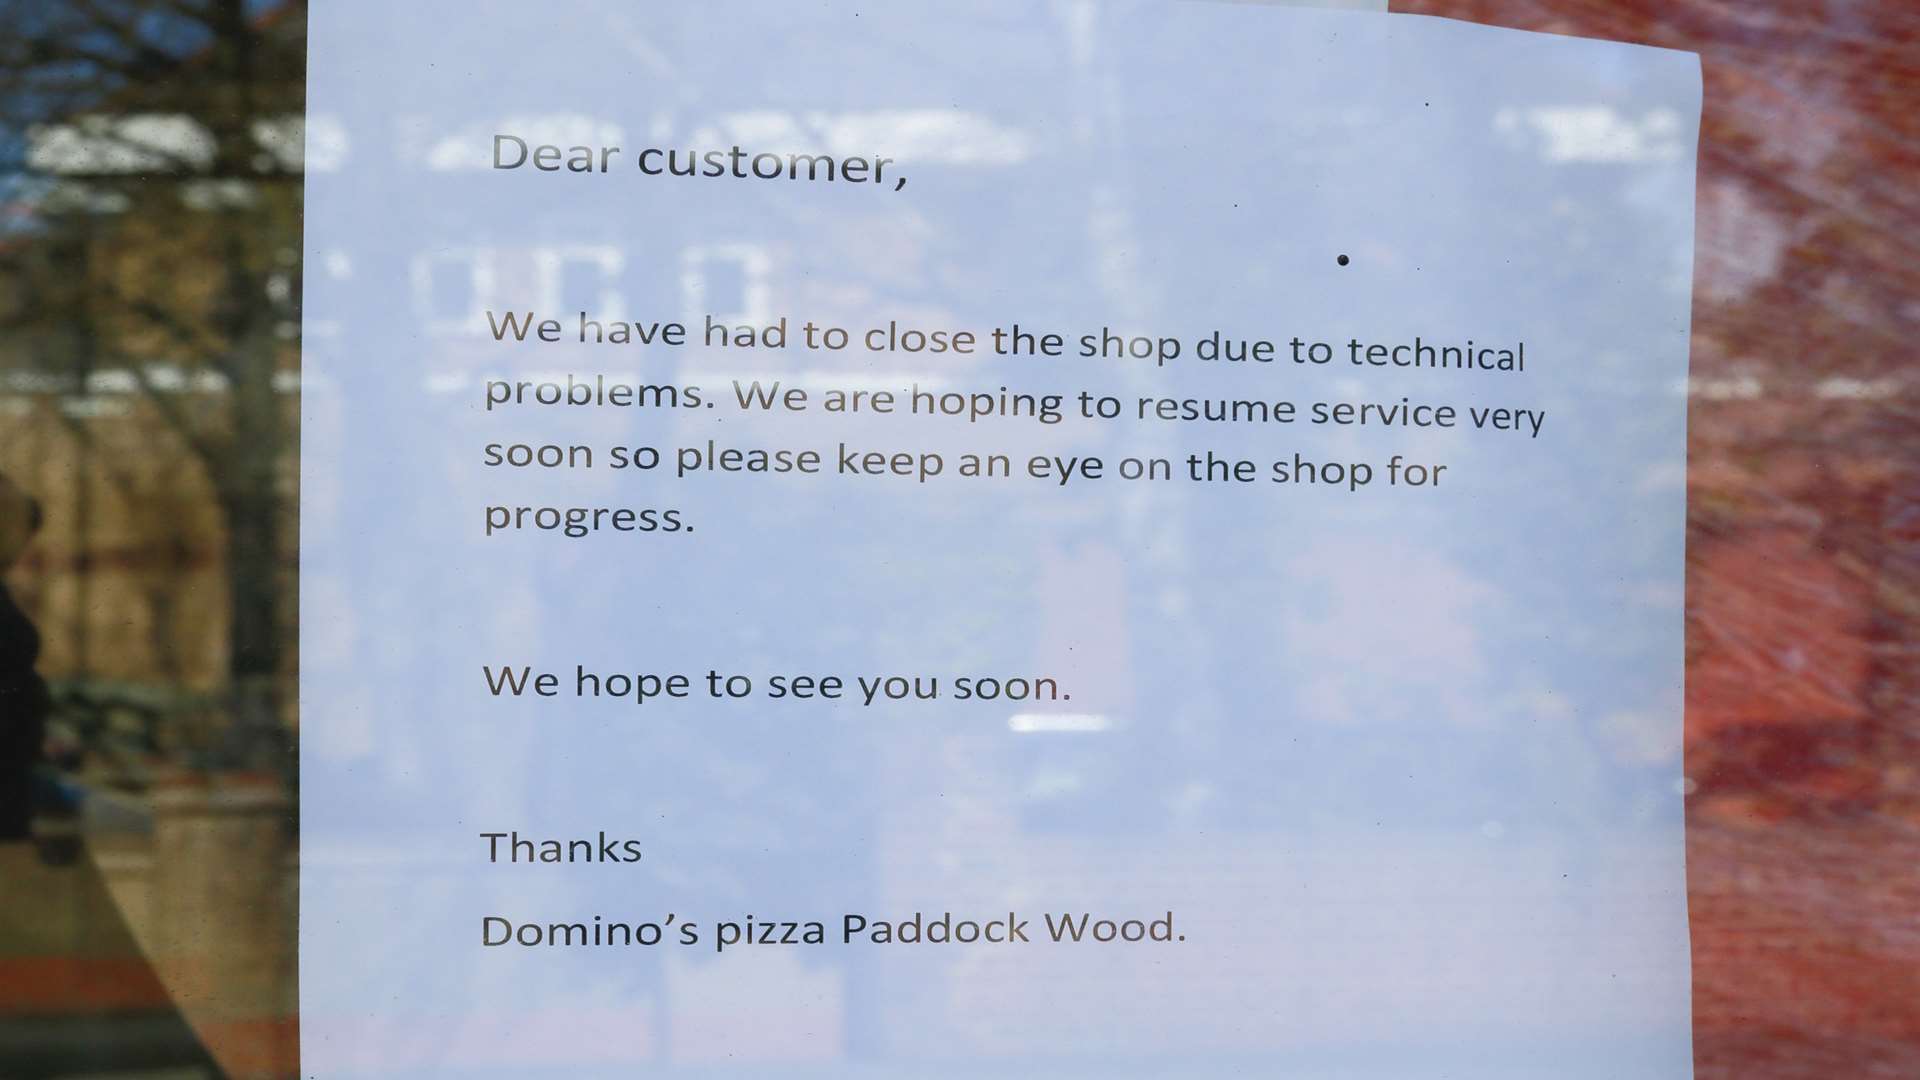 The sign being displayed in the store's window